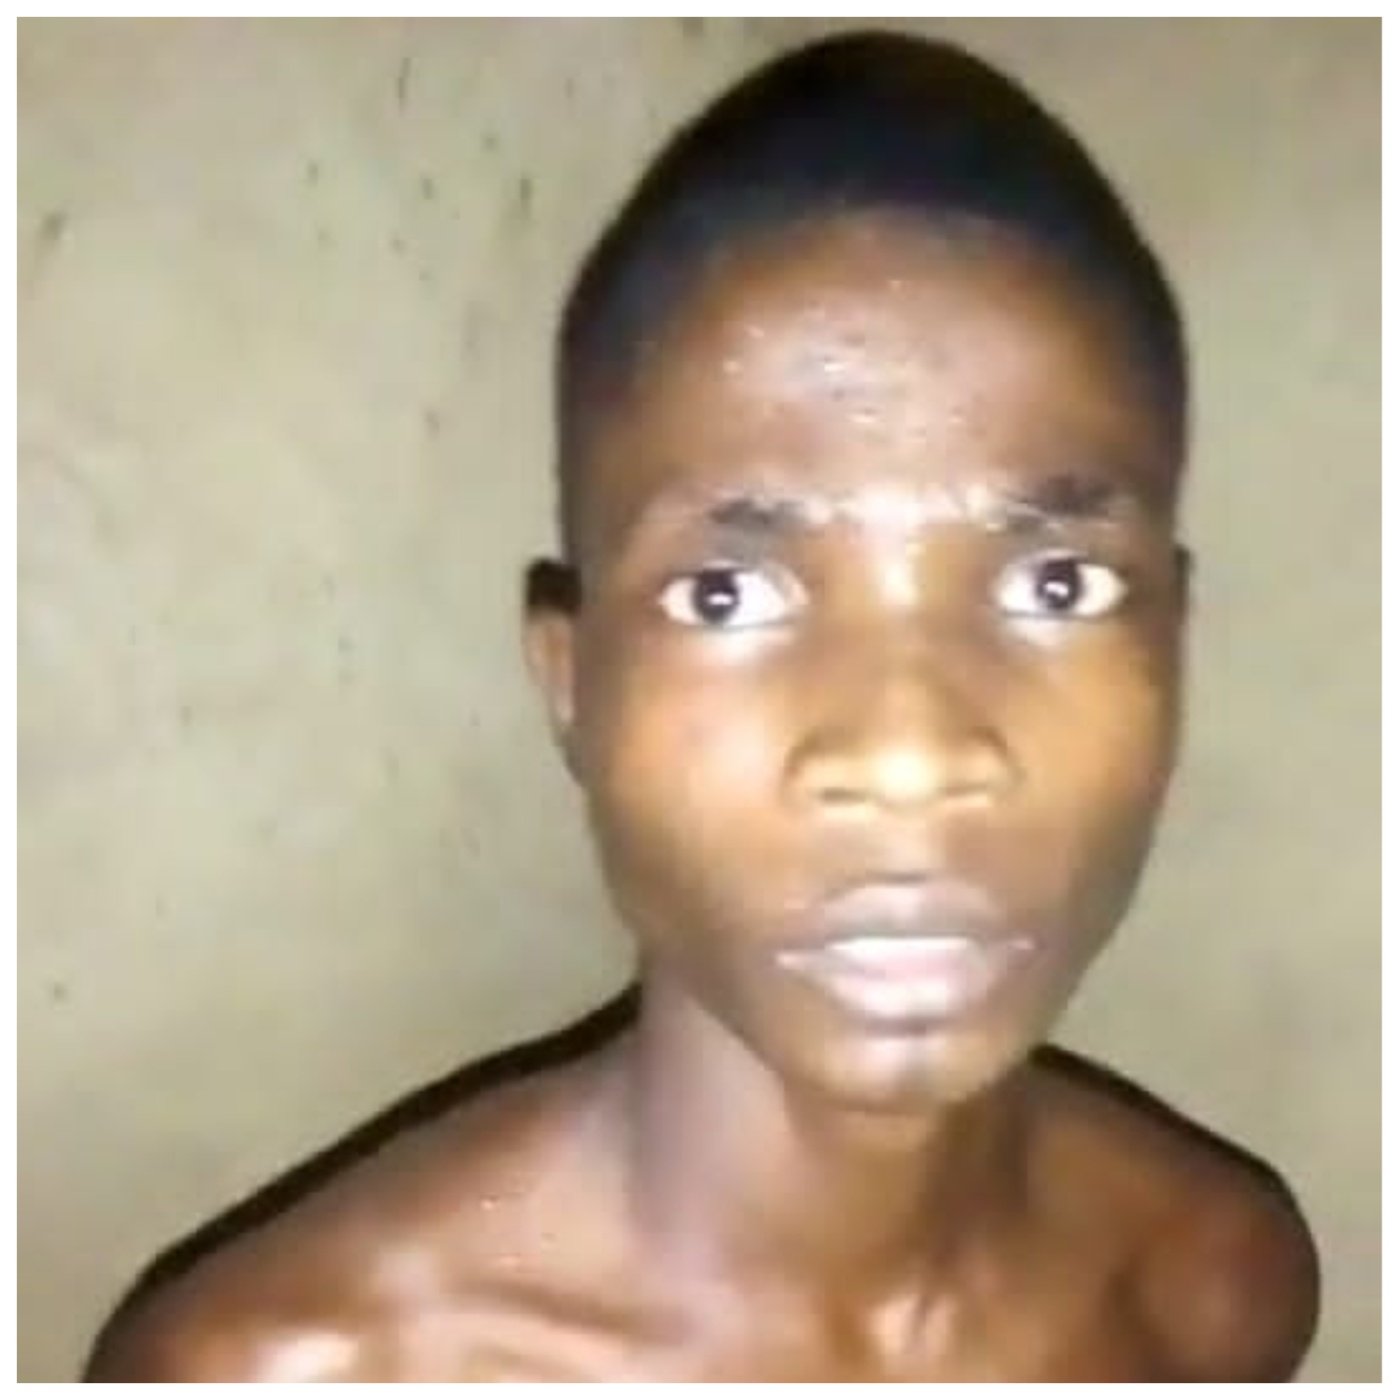 20-year-old uses Father's private part for money ritual